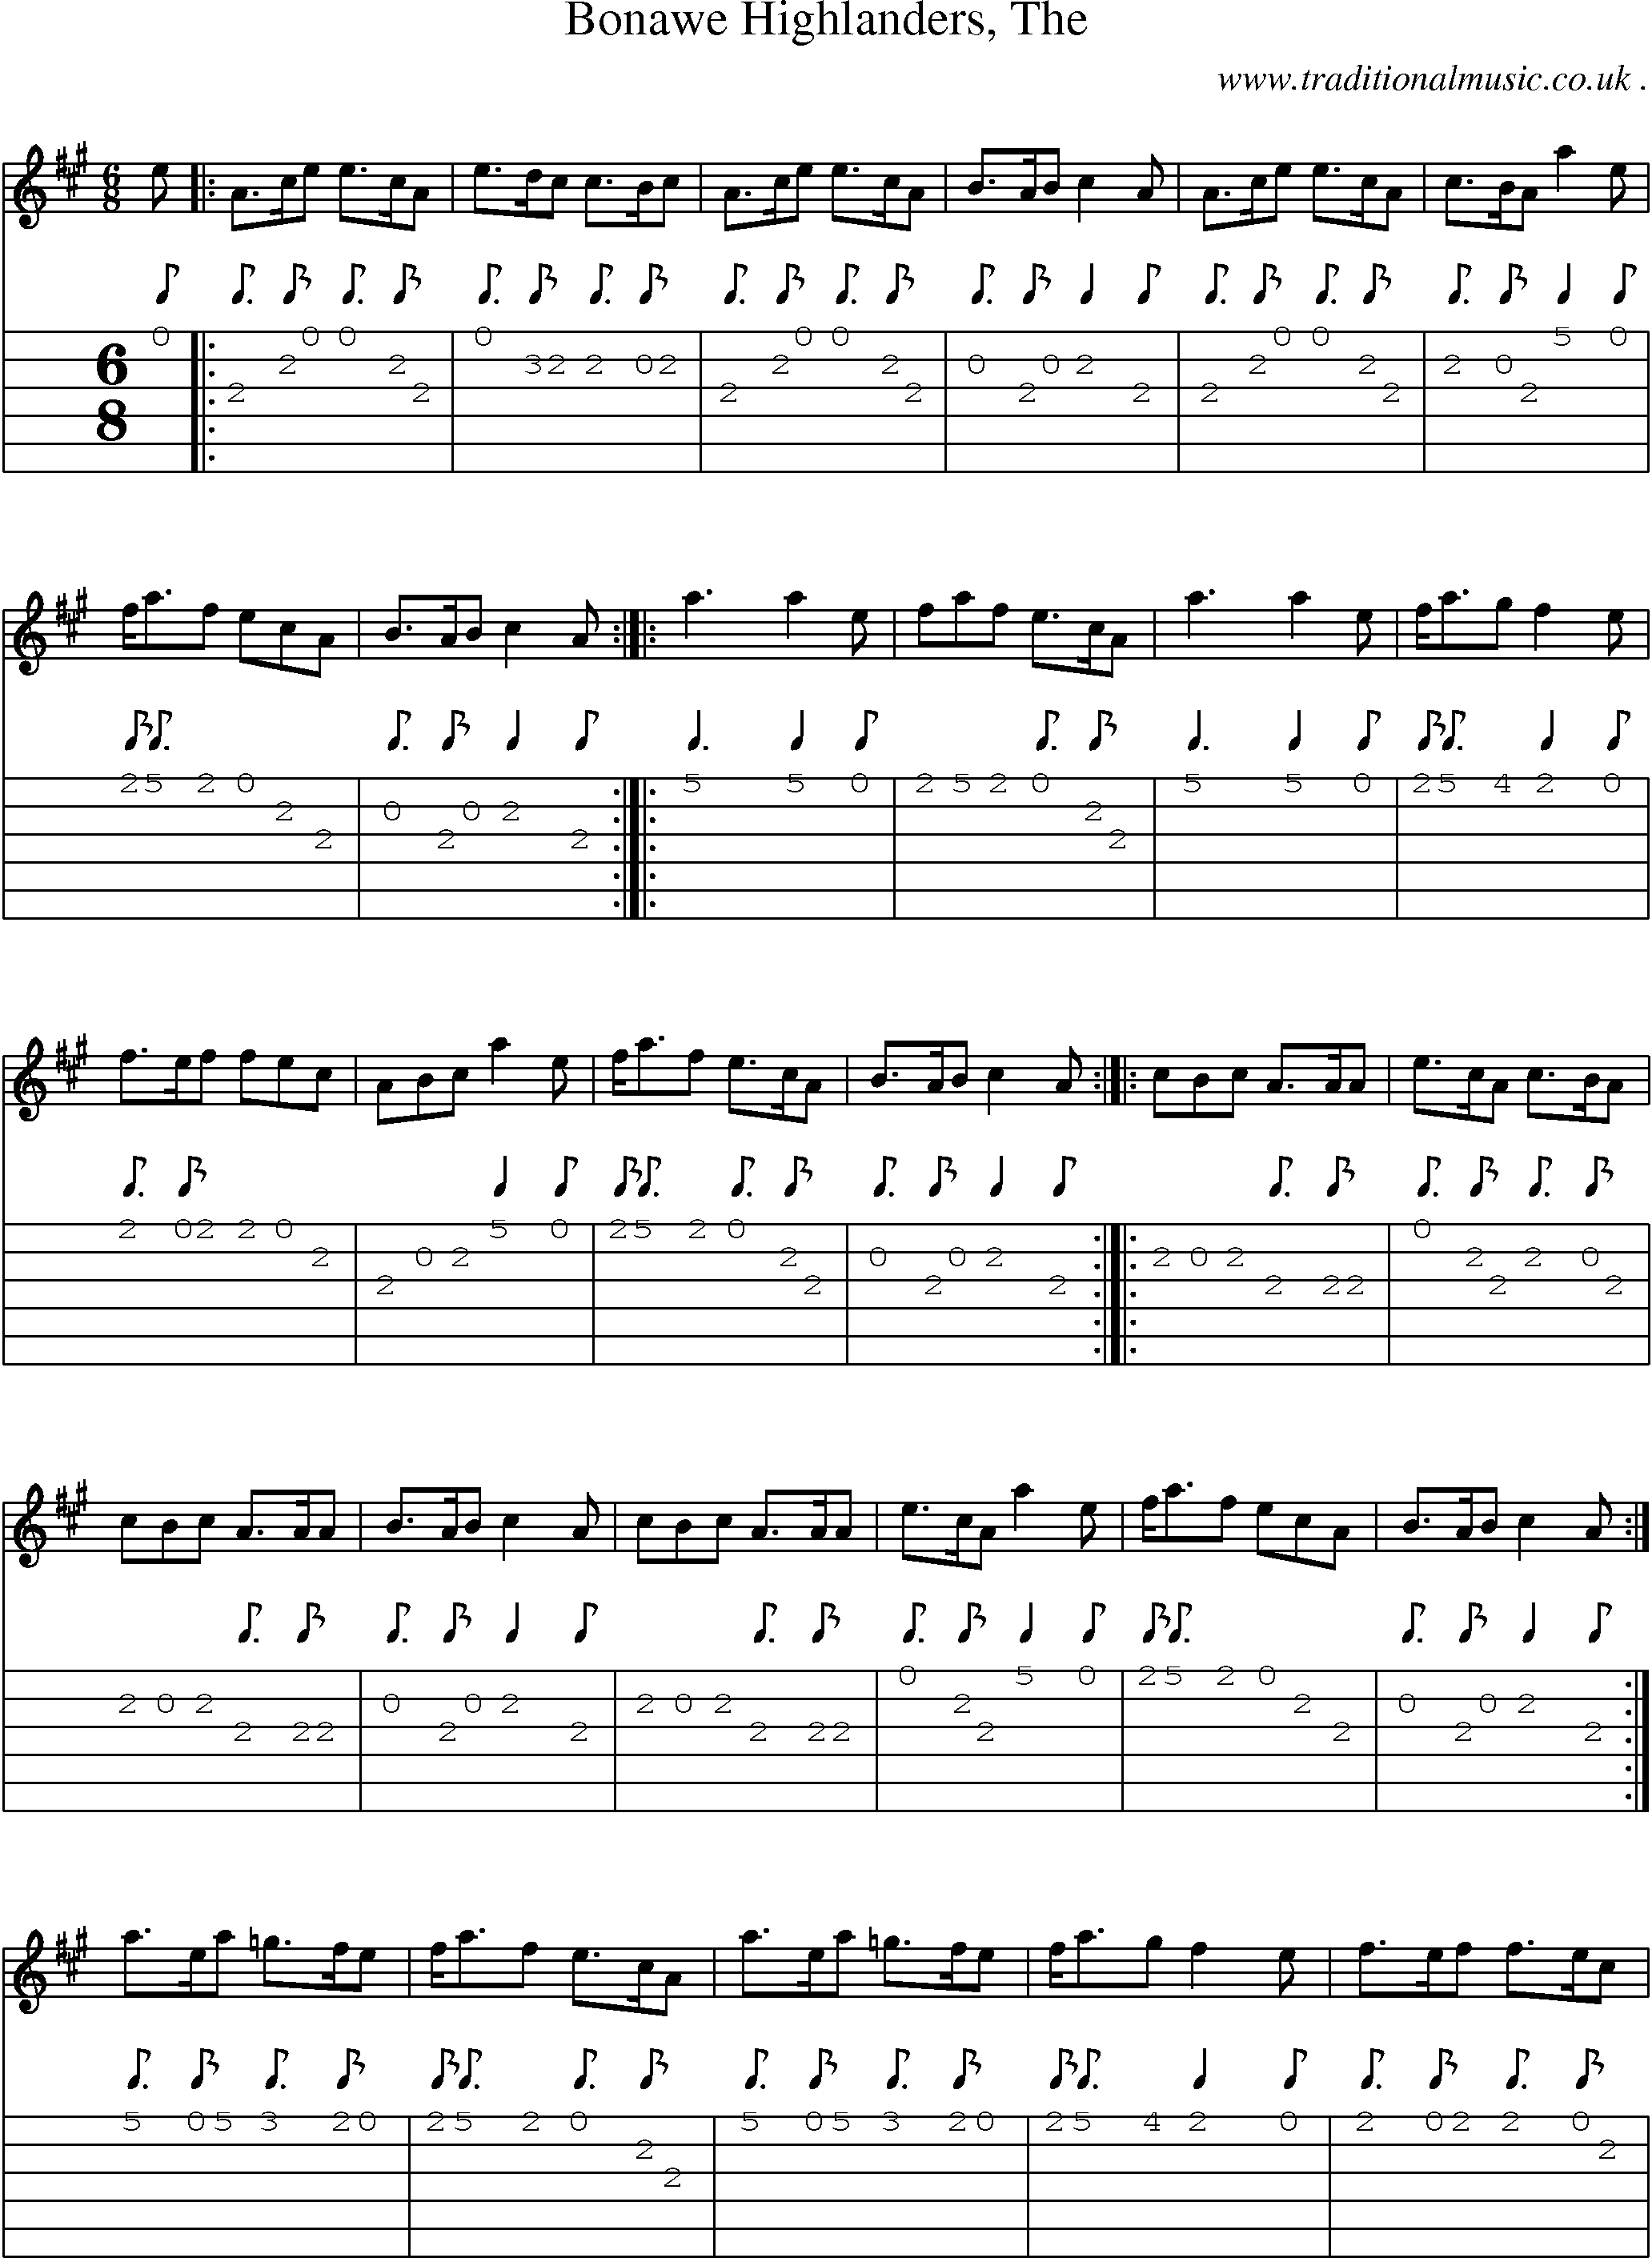 Sheet-music  score, Chords and Guitar Tabs for Bonawe Highlanders The